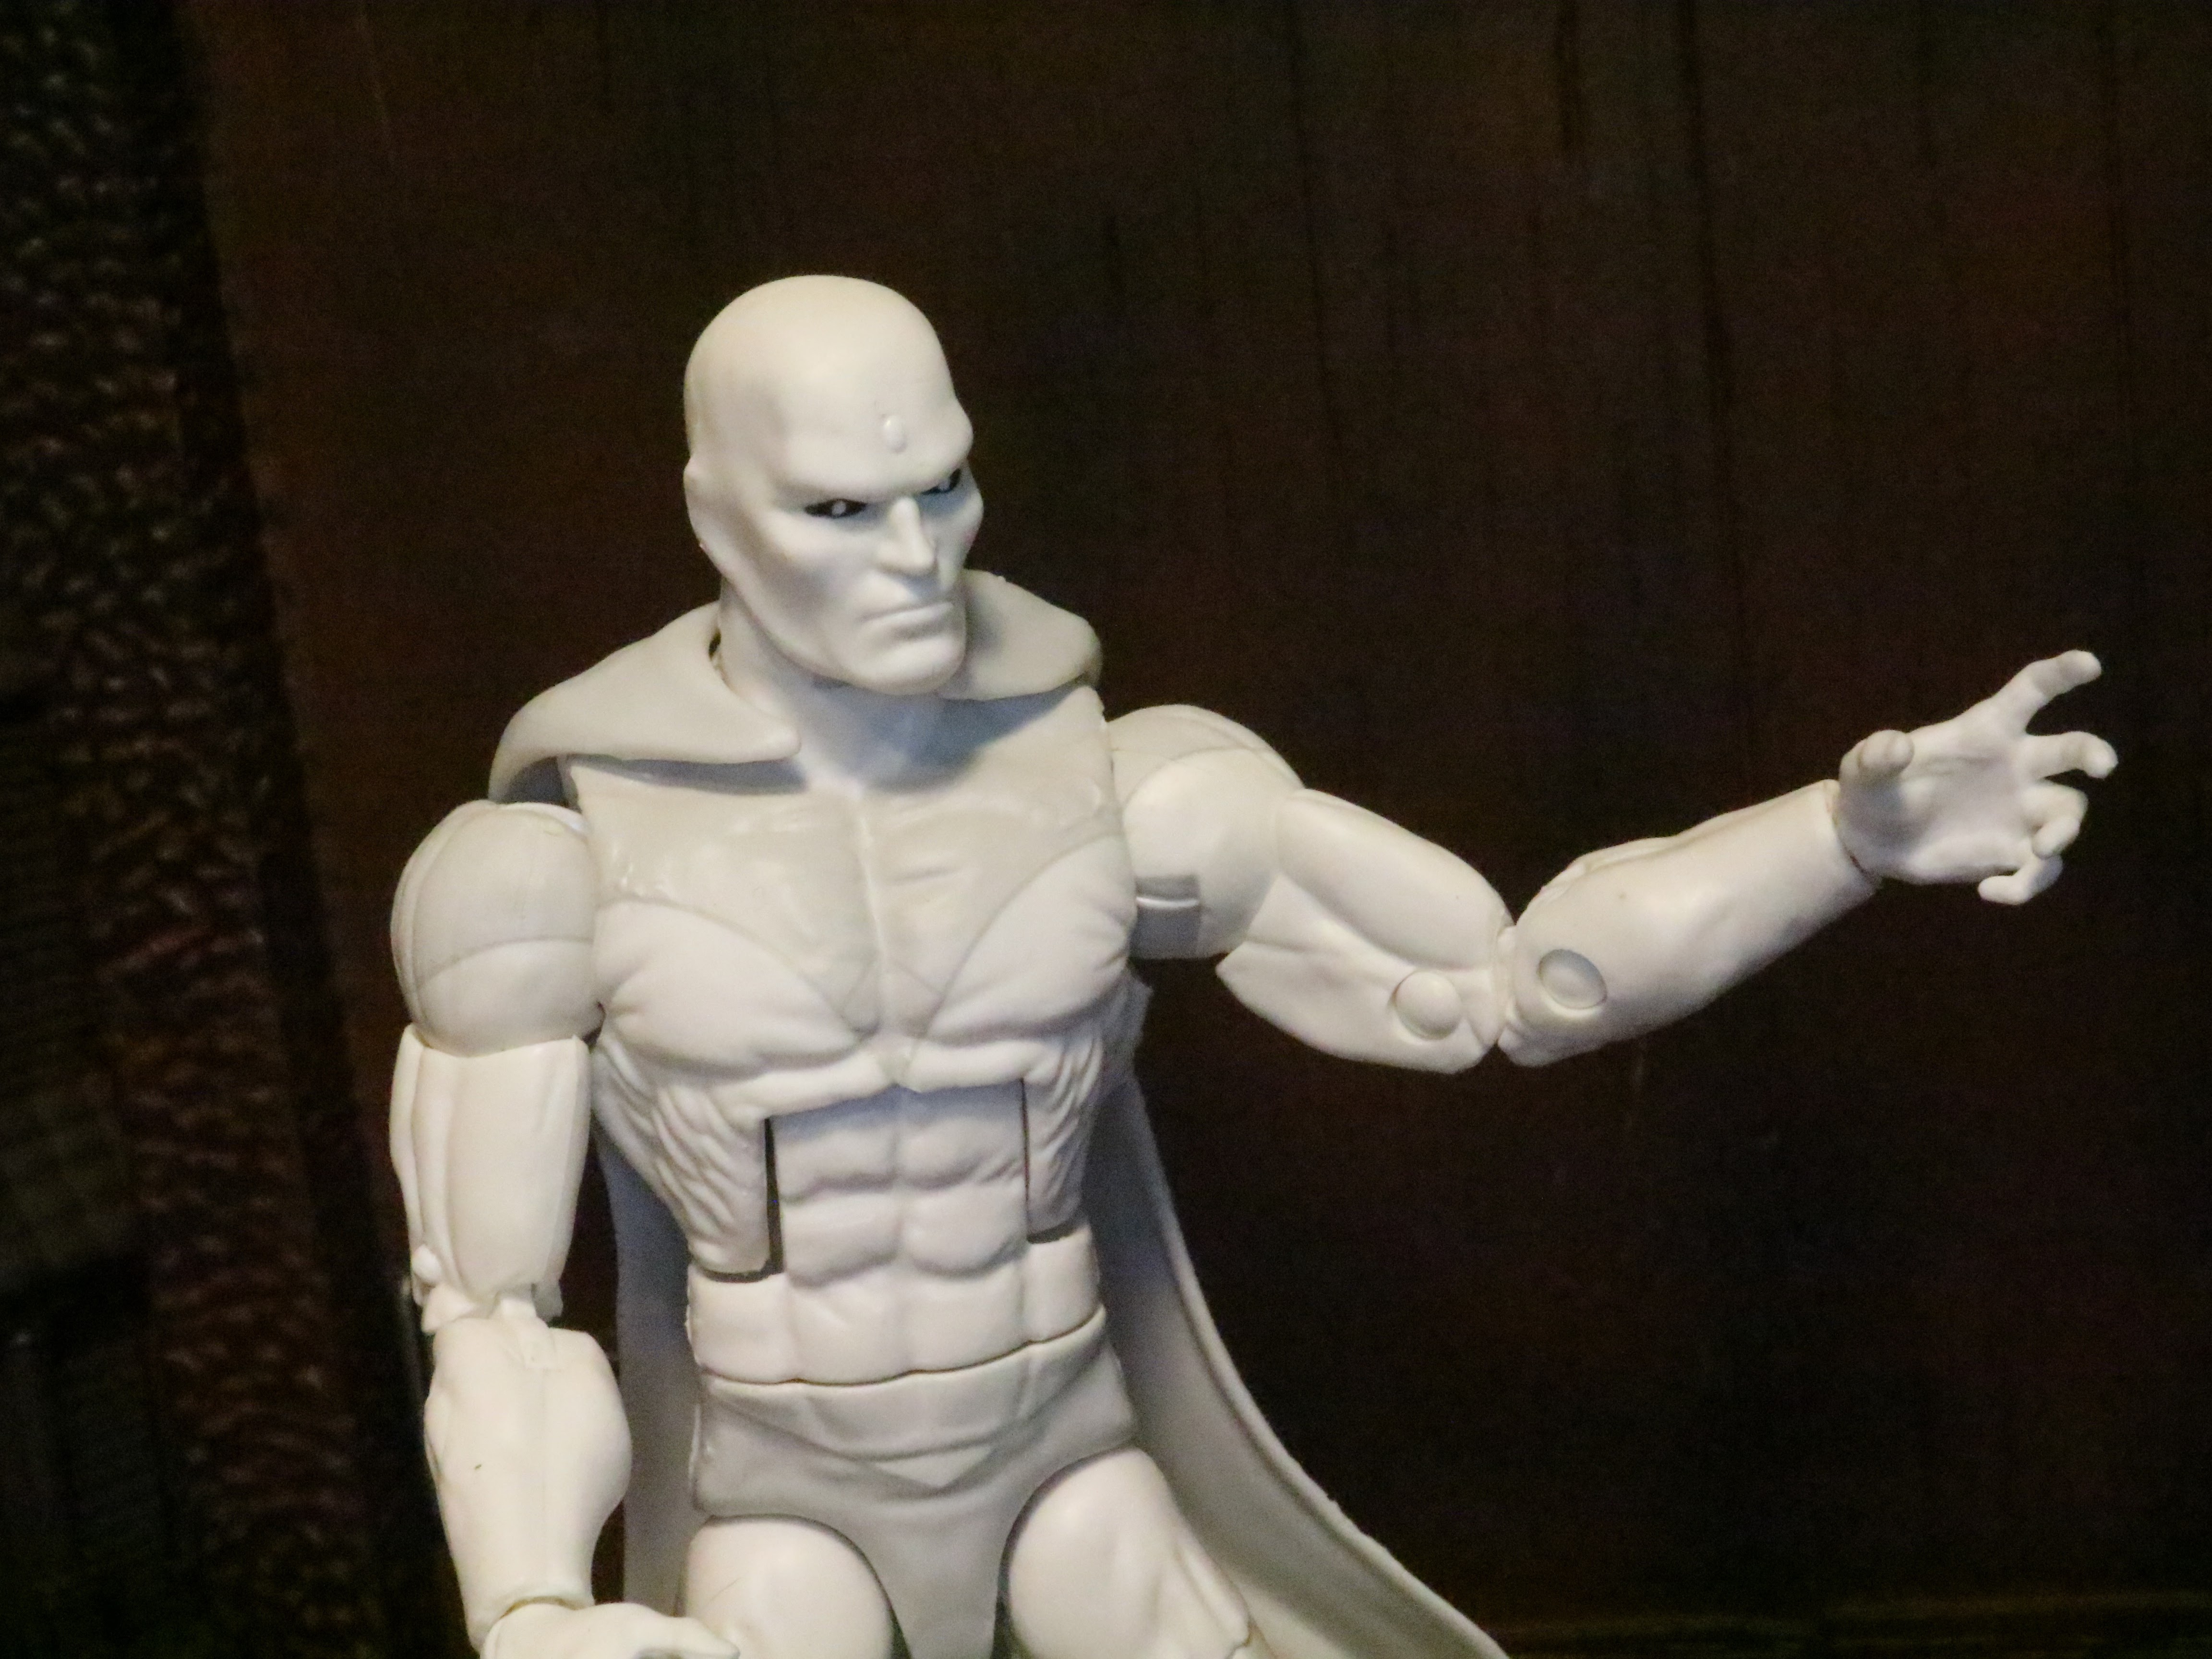 Marvel Legends Retro Collection WHITE VISION - The West Coast Avengers -  Figurine Collector EURL